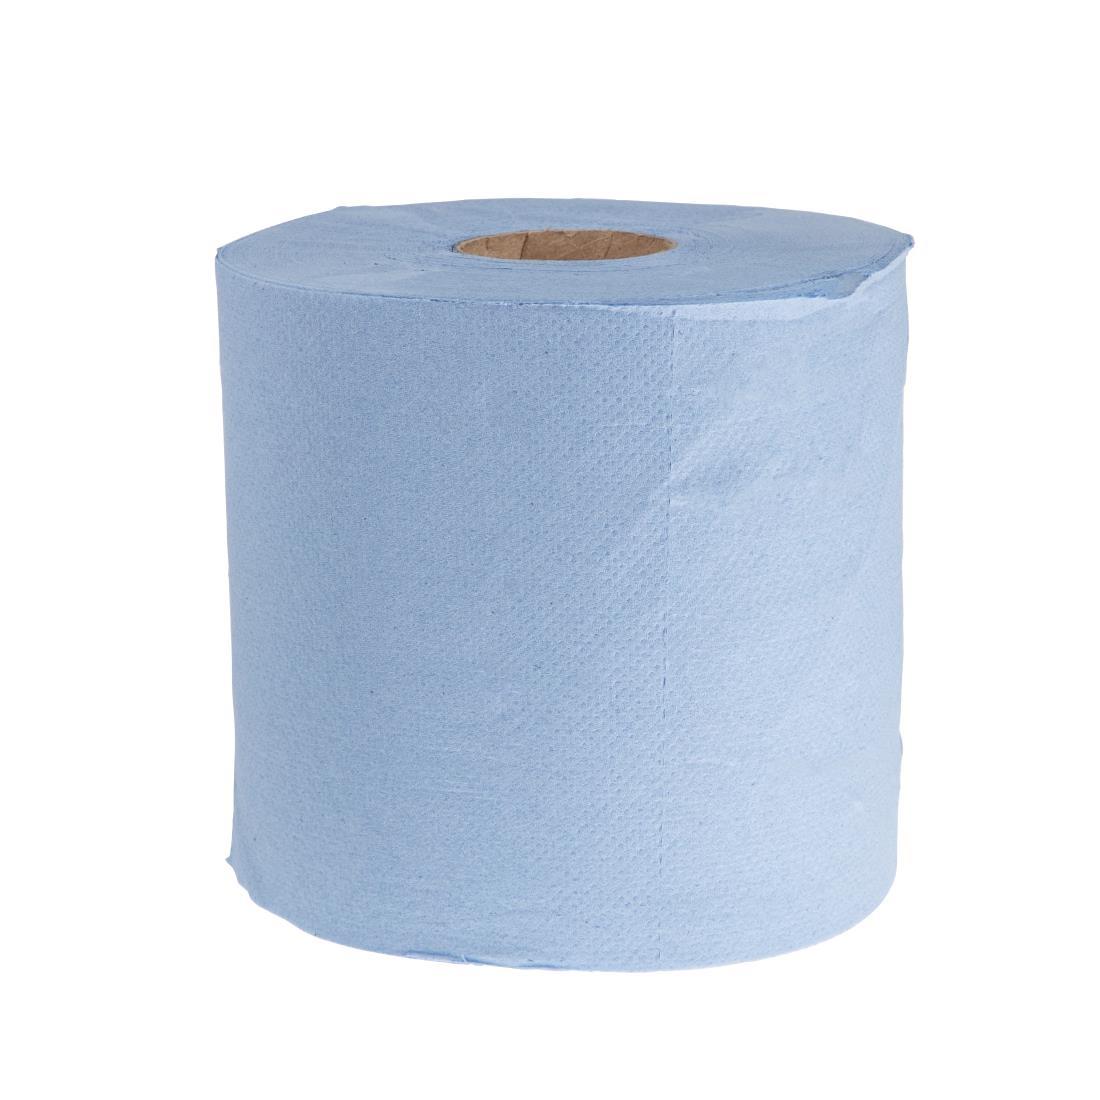 Jantex Centrefeed Blue Rolls 2-Ply 120m (Pack of 18) - CF971  - 1